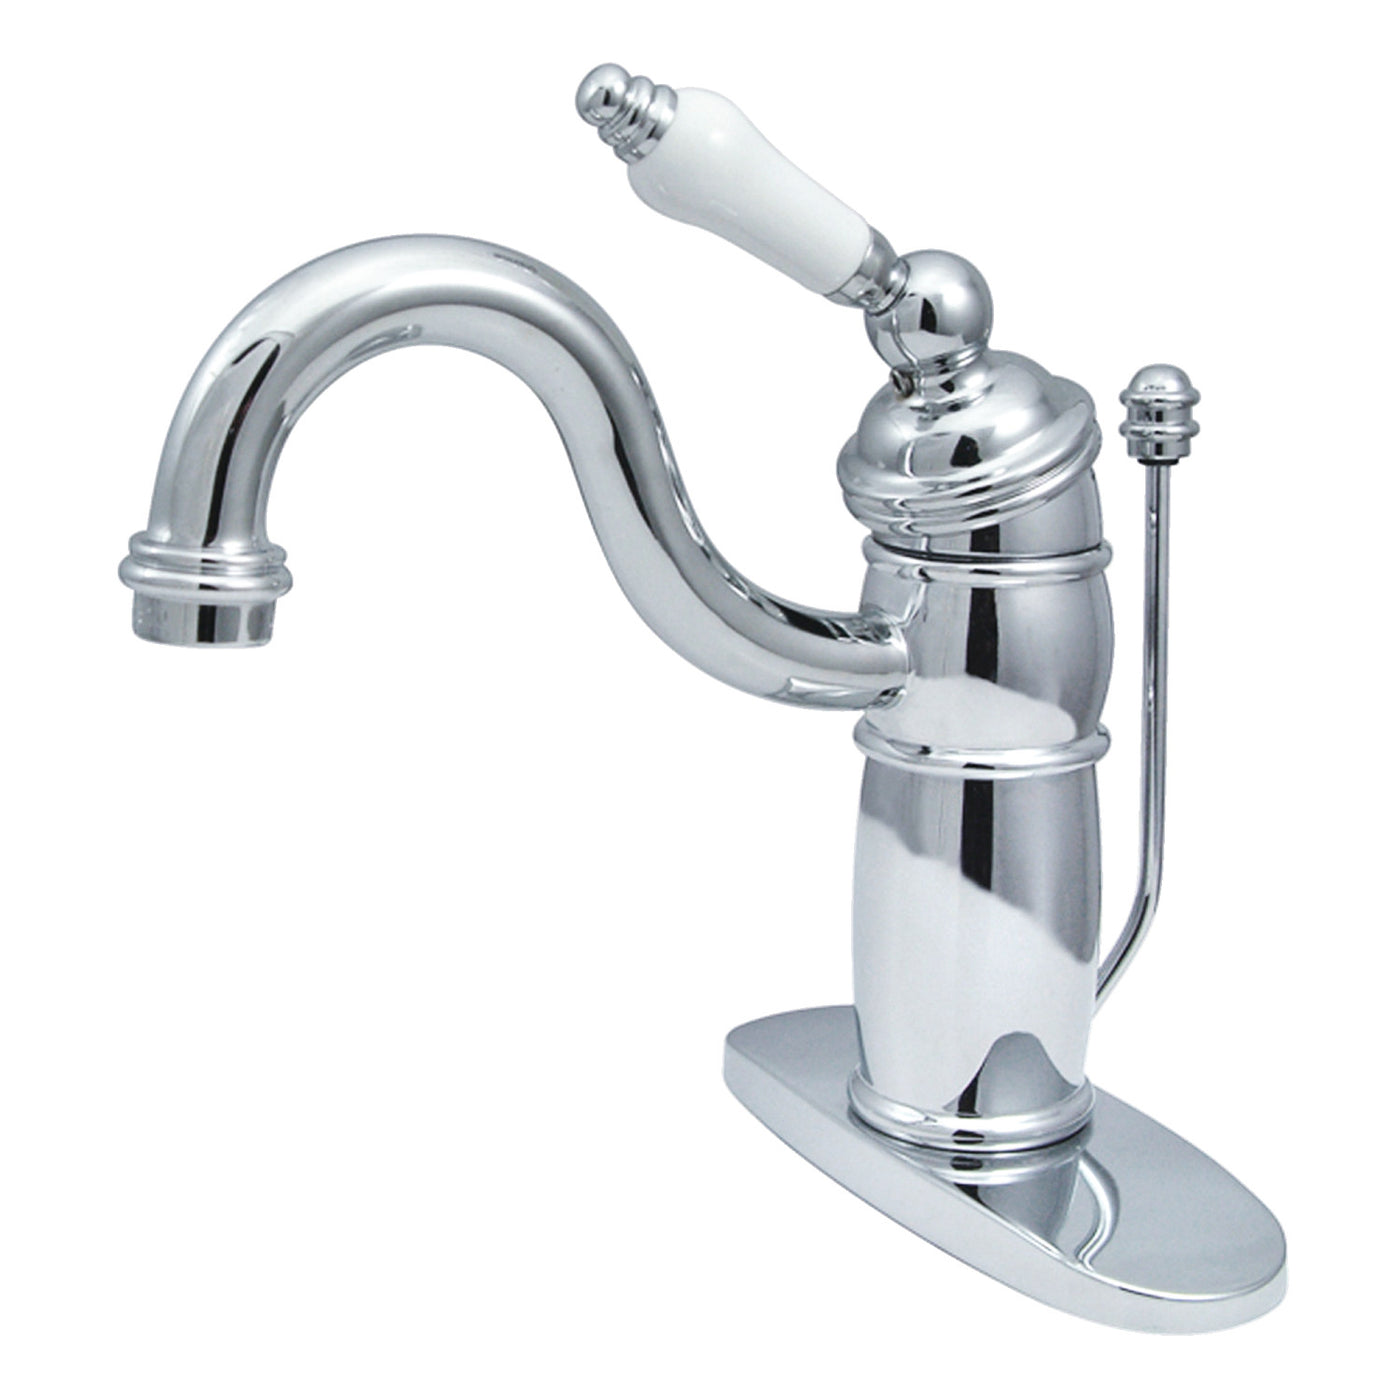 Elements of Design EB1401PL Single-Handle Bathroom Faucet with Pop-Up Drain, Polished Chrome